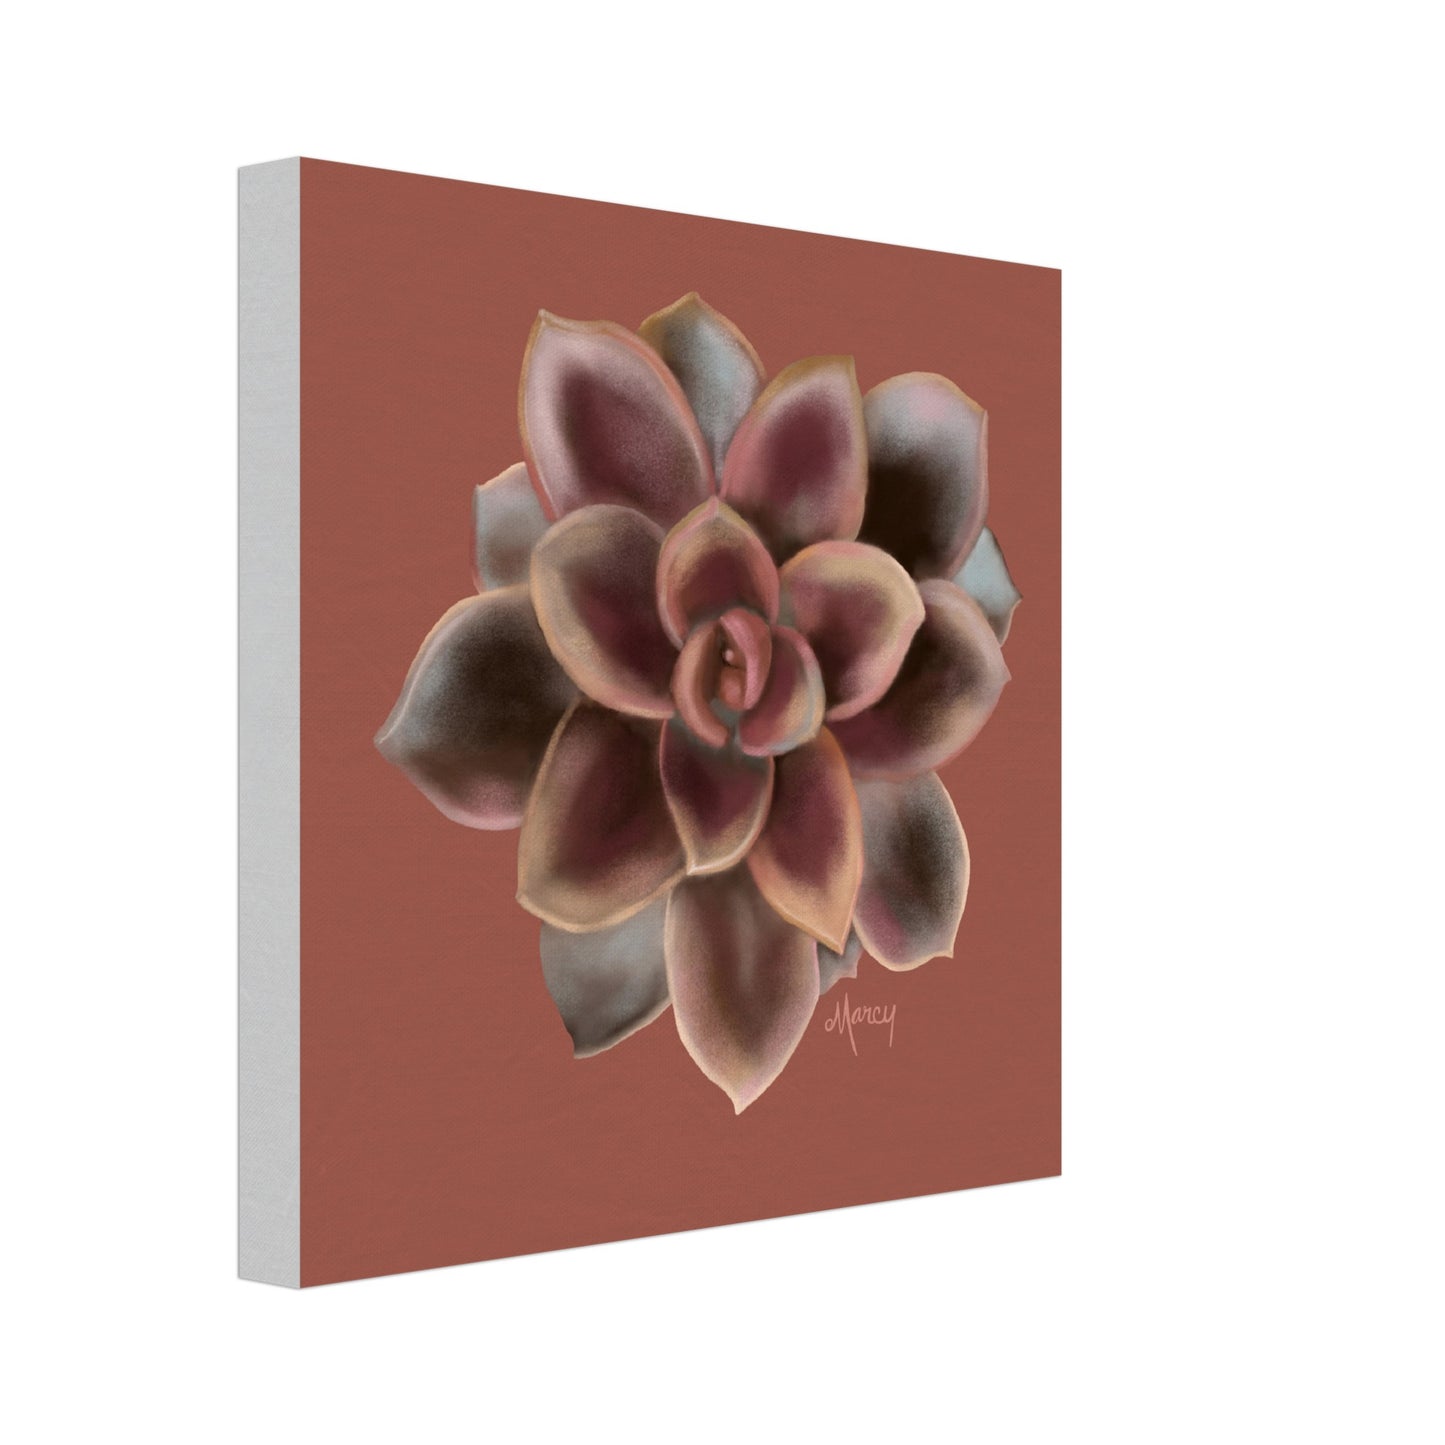 Chocolate Succulent on Stretched Canvas